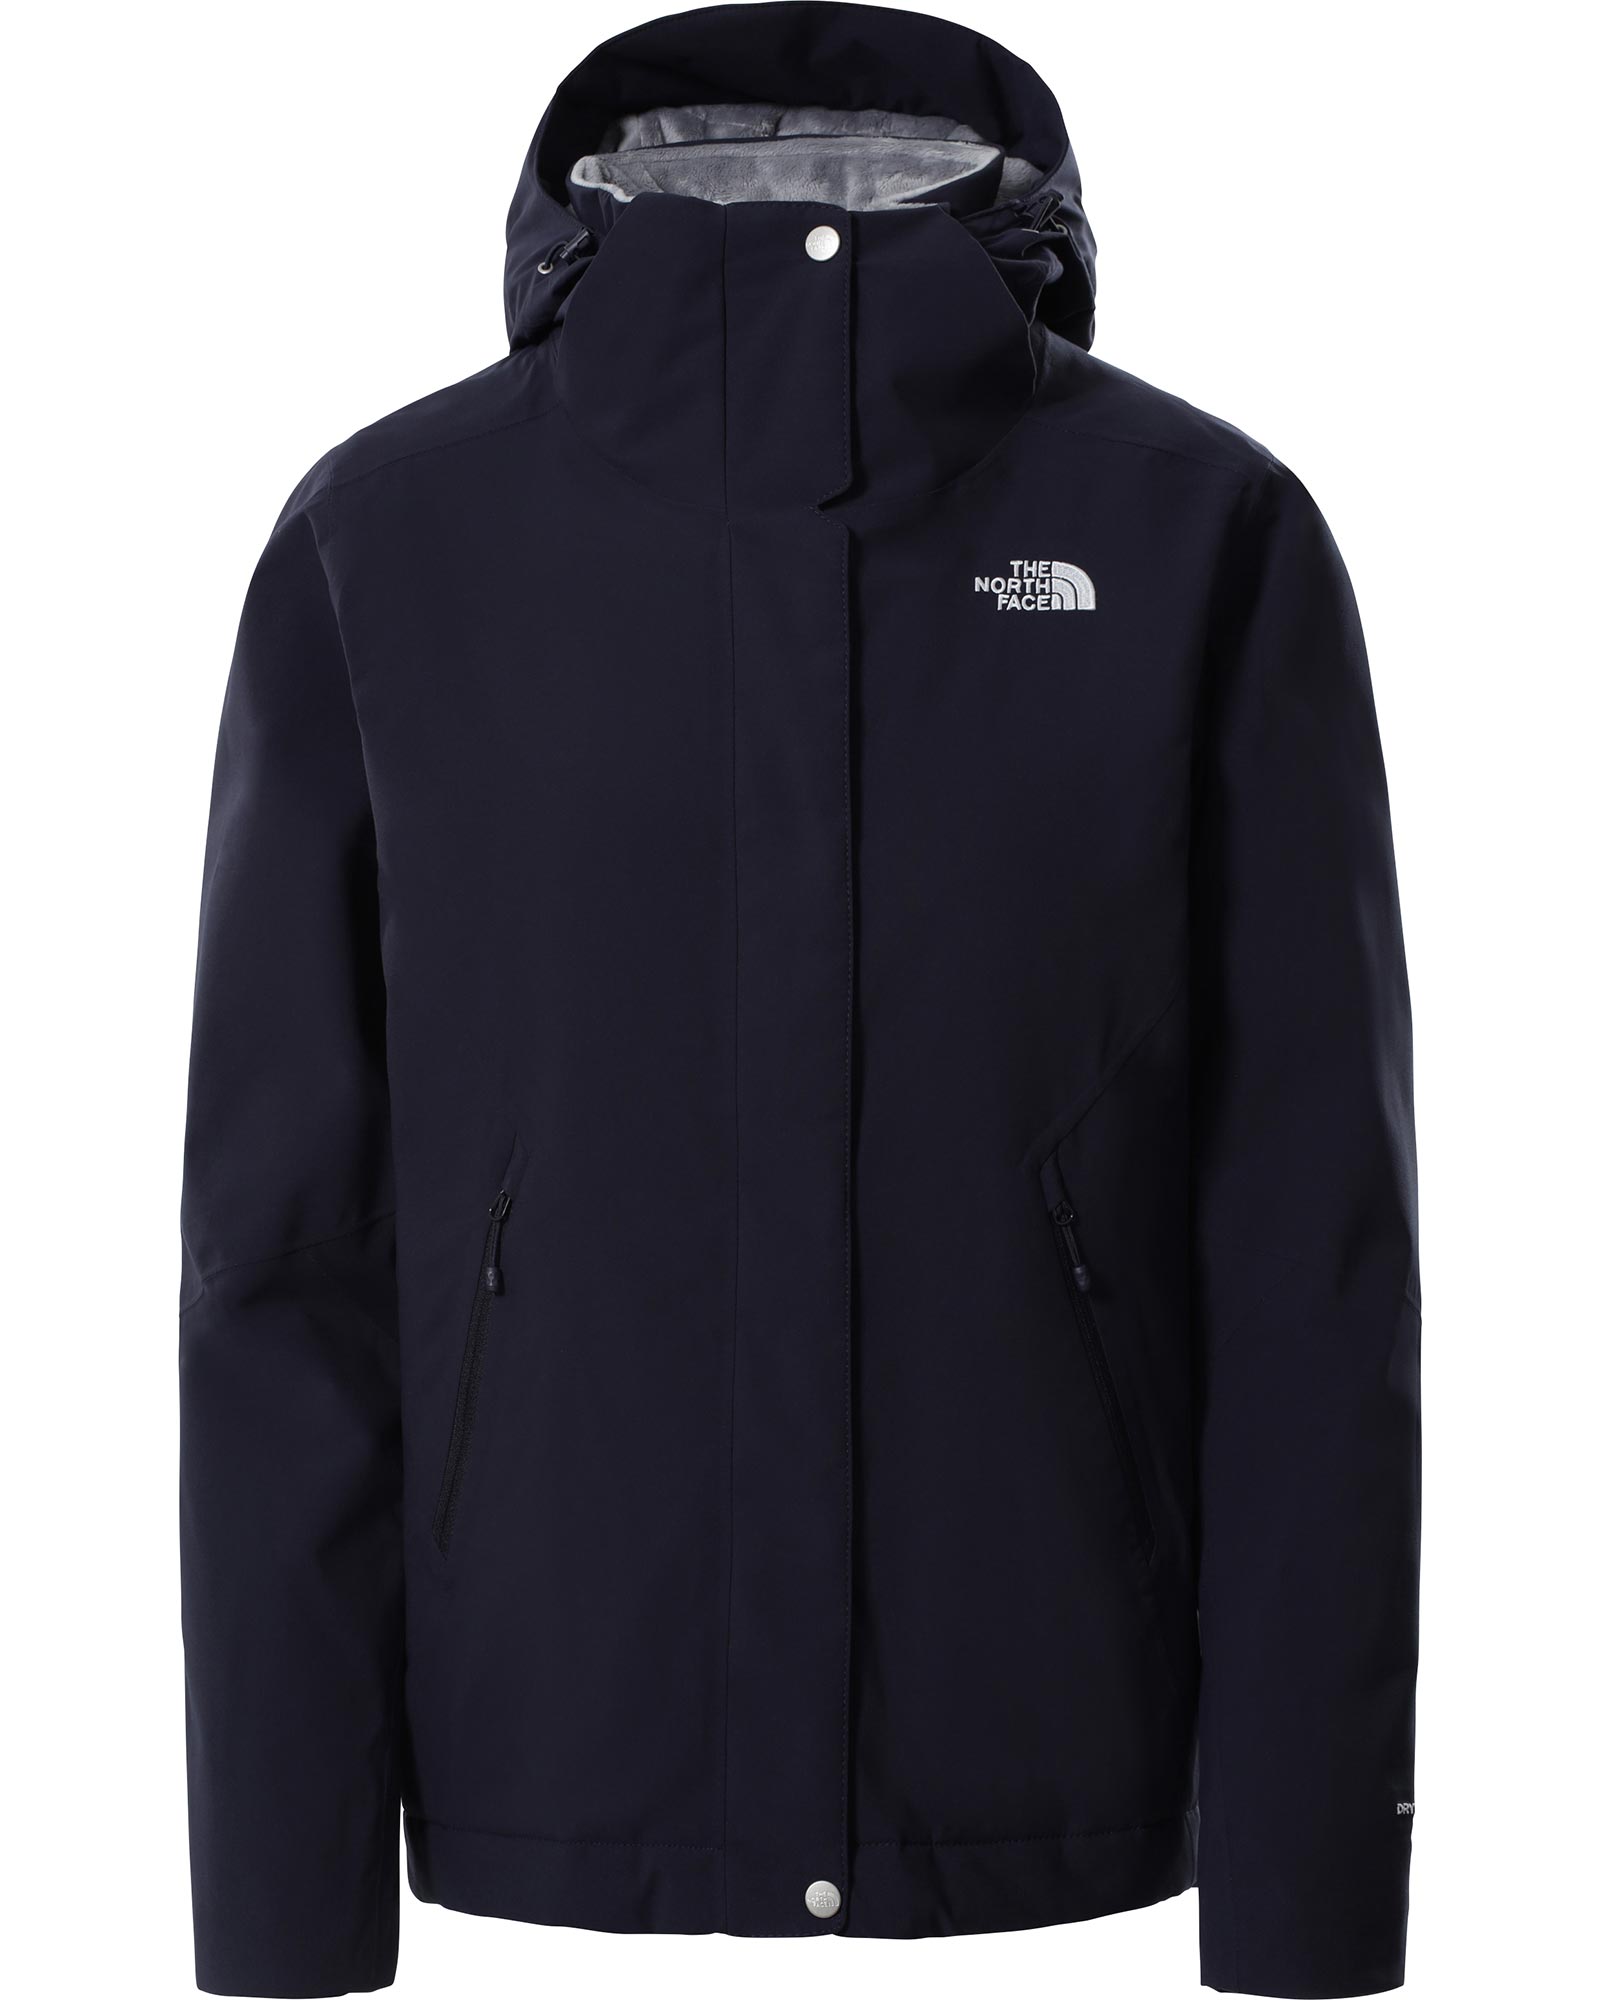 The North Face Inlux Insulated DryVent Women’s Insulated Jacket - Aviator Navy XS